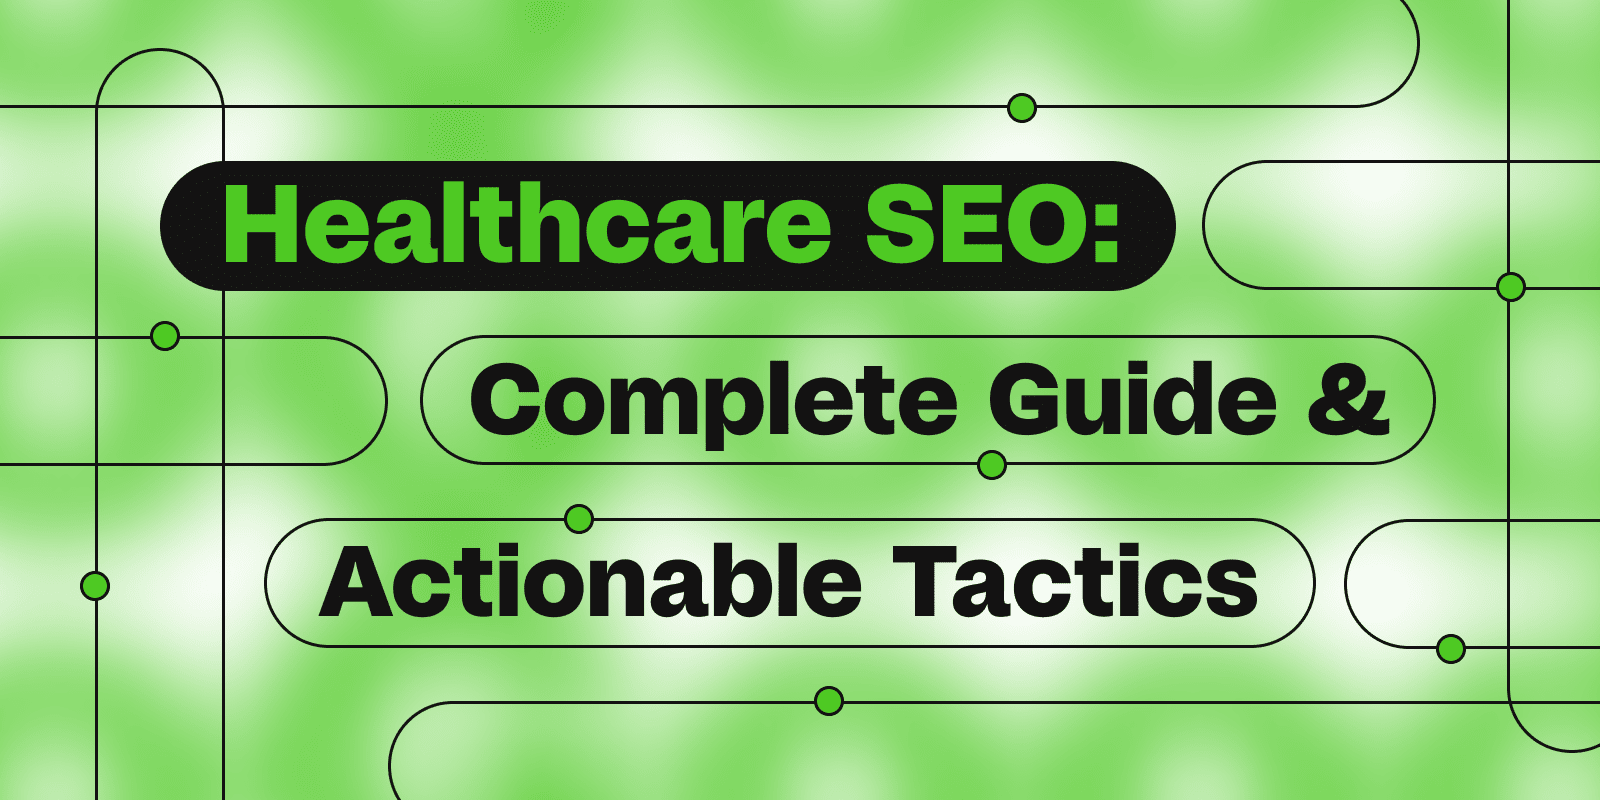 Healthcare SEO Complete Guide ad Actionable Tactics